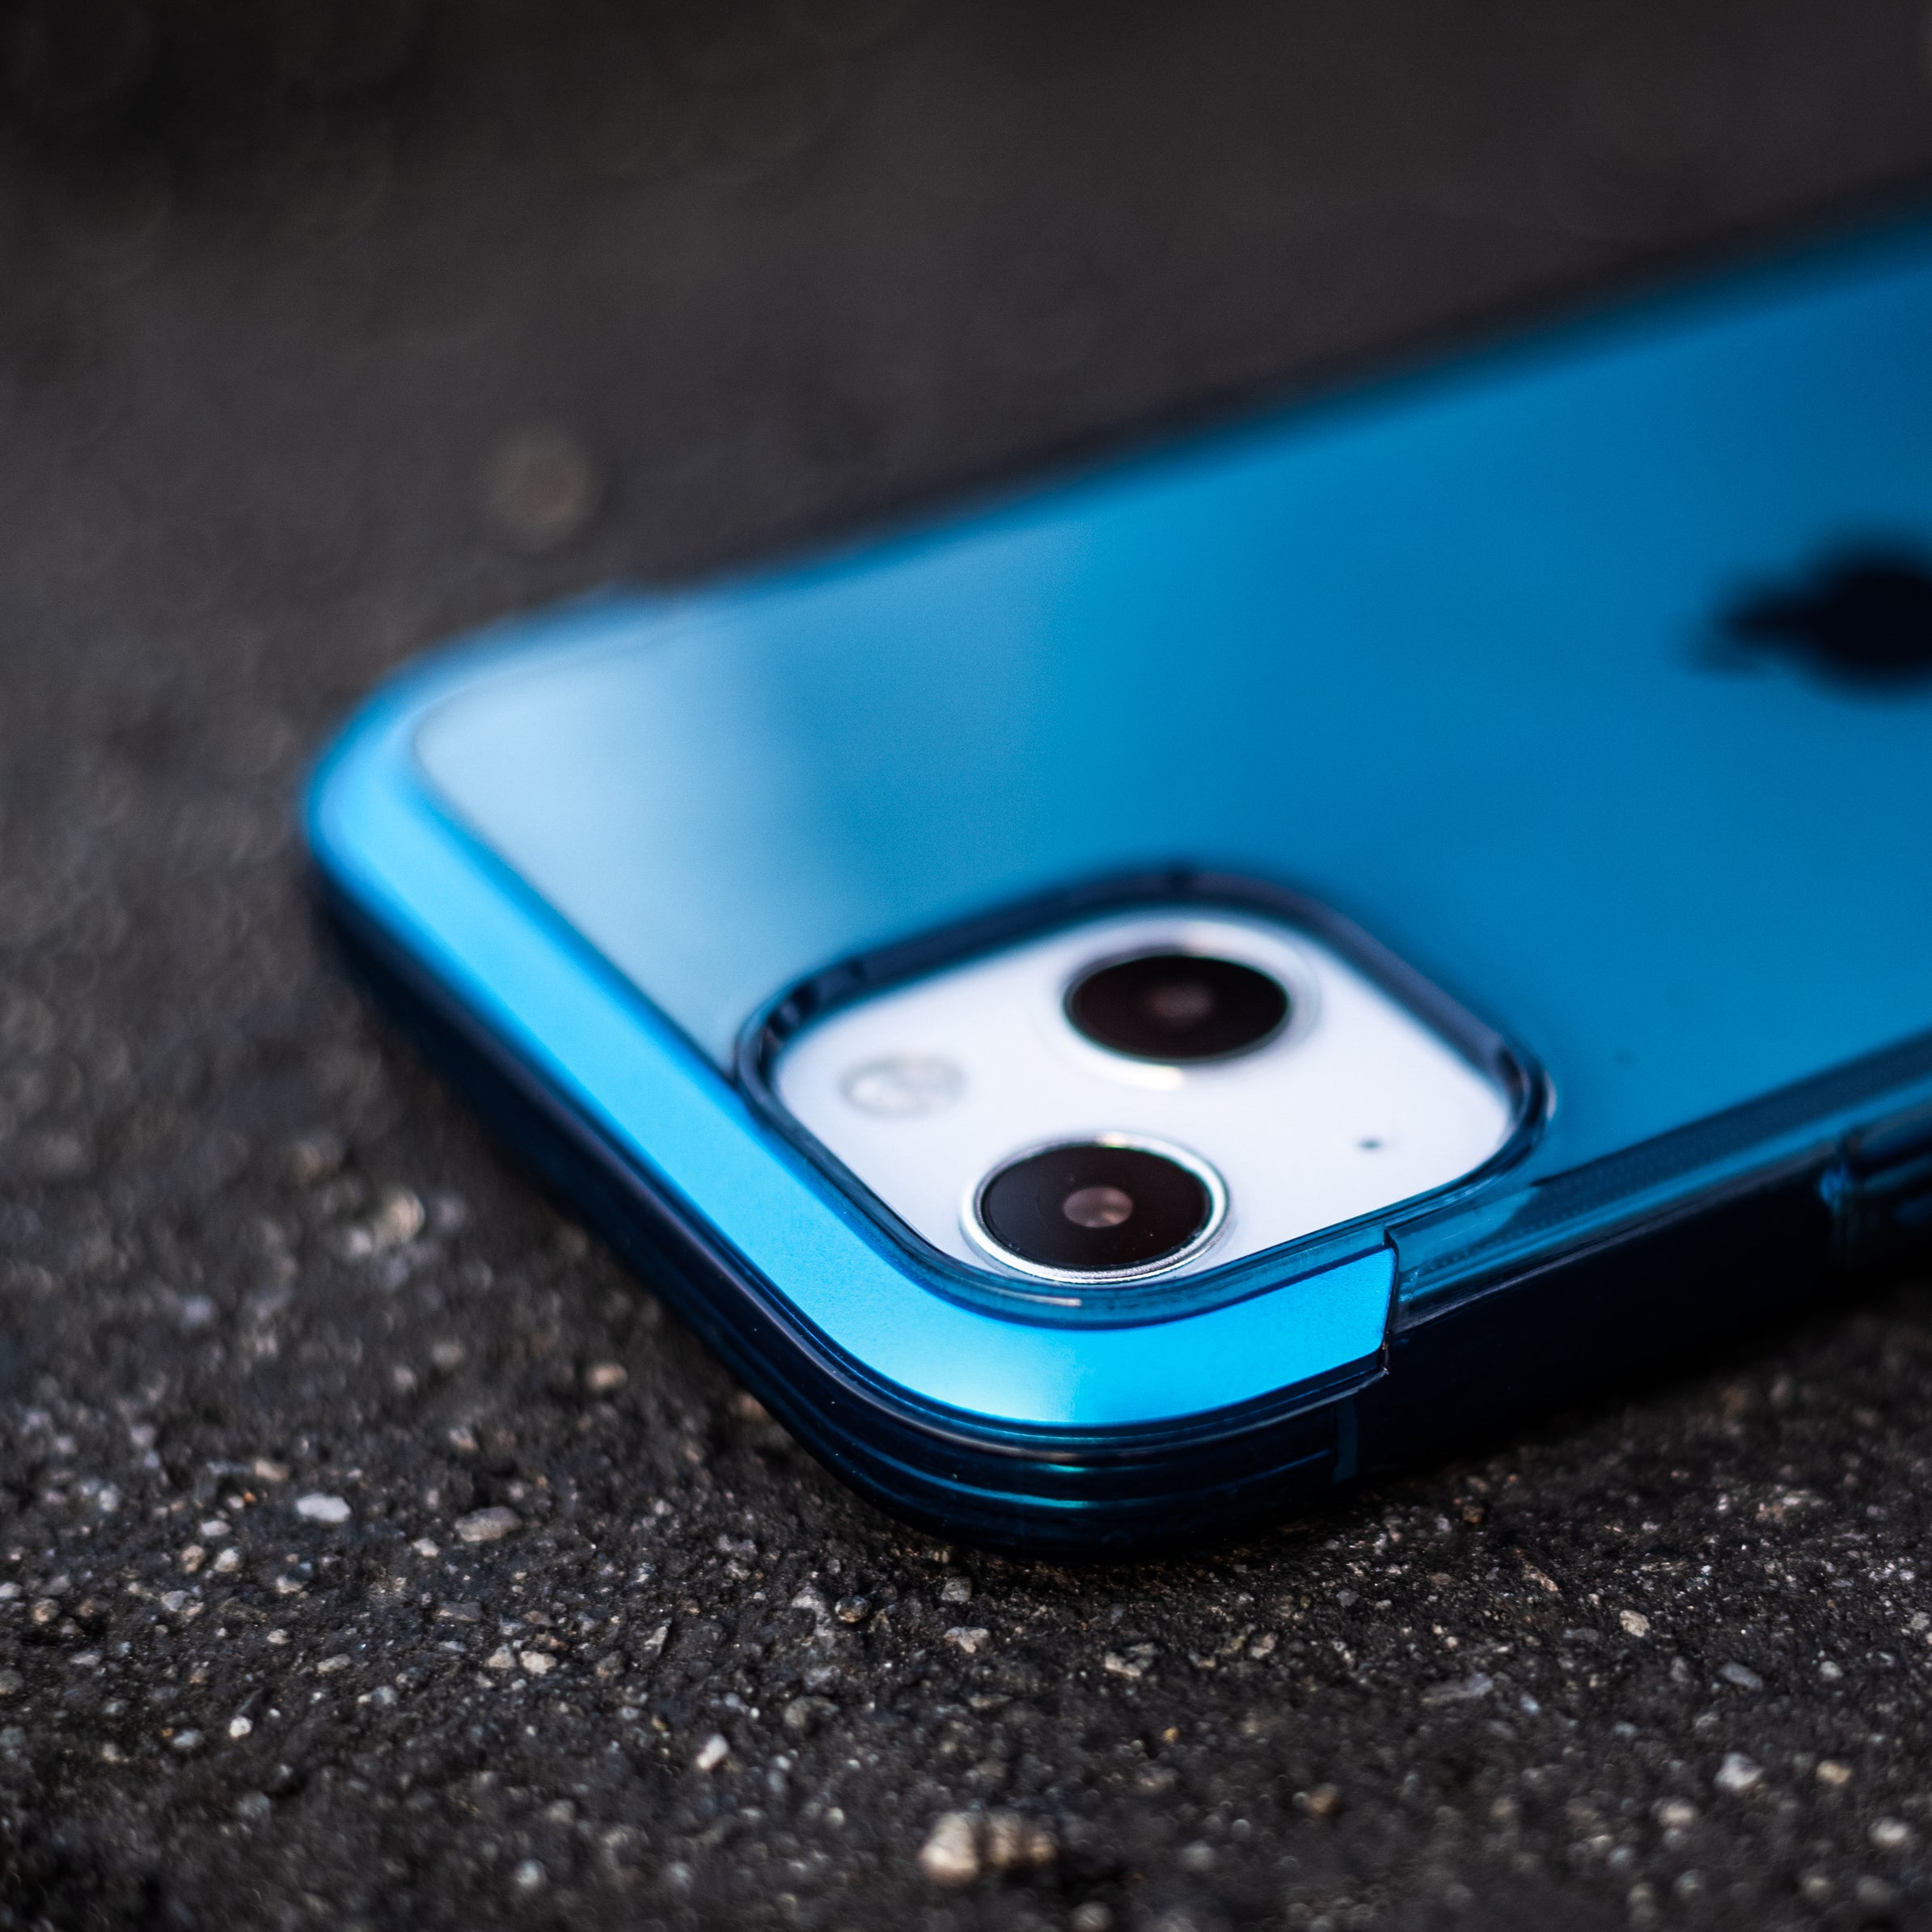 A blue Raptic iPhone 13 Pro Case - AIR with two cameras that is wireless charging compatible.